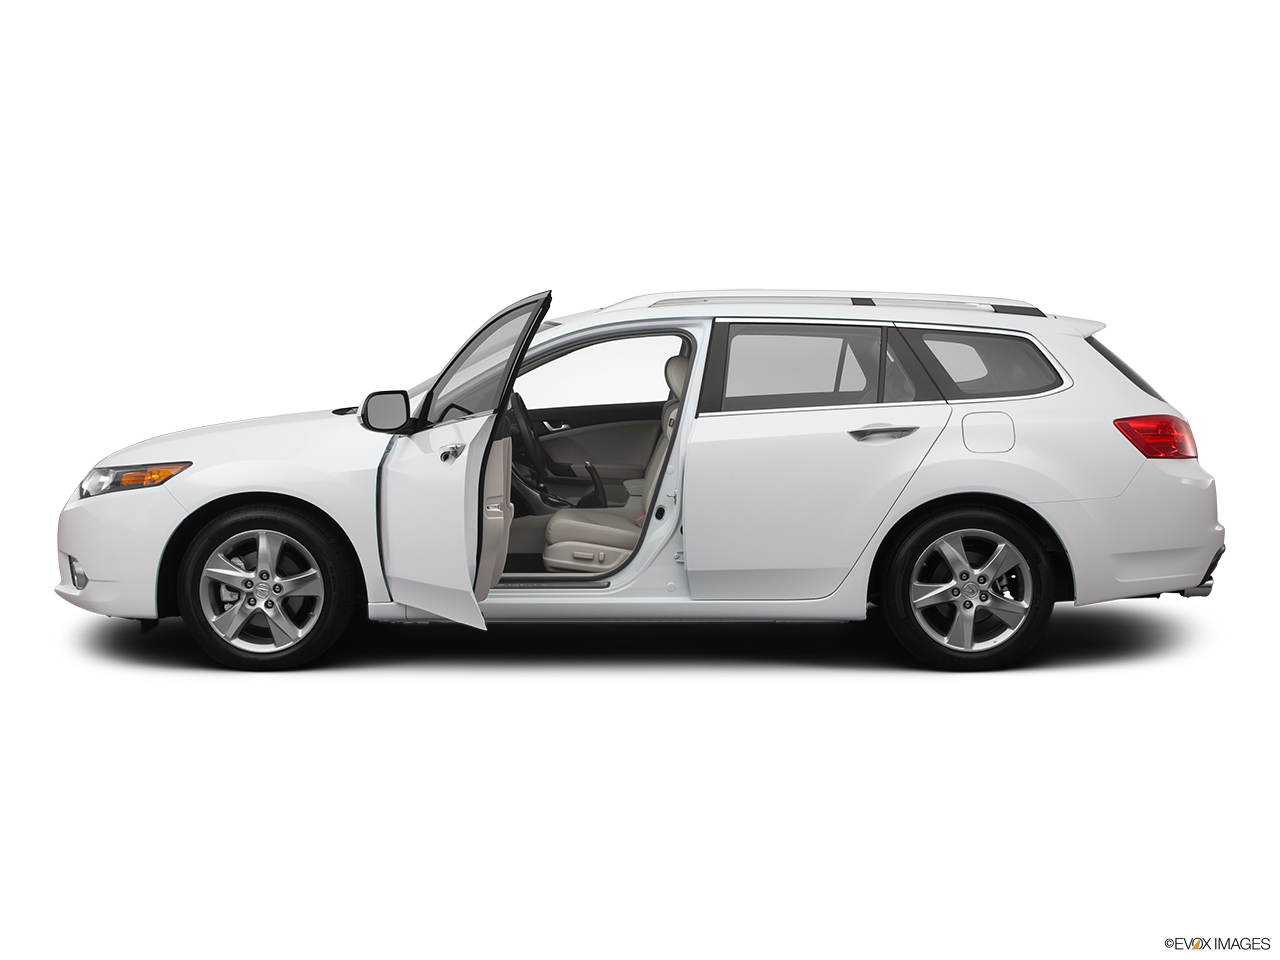 2012 Acura TSX Sport Wagon Driver's side profile with drivers side door open. 